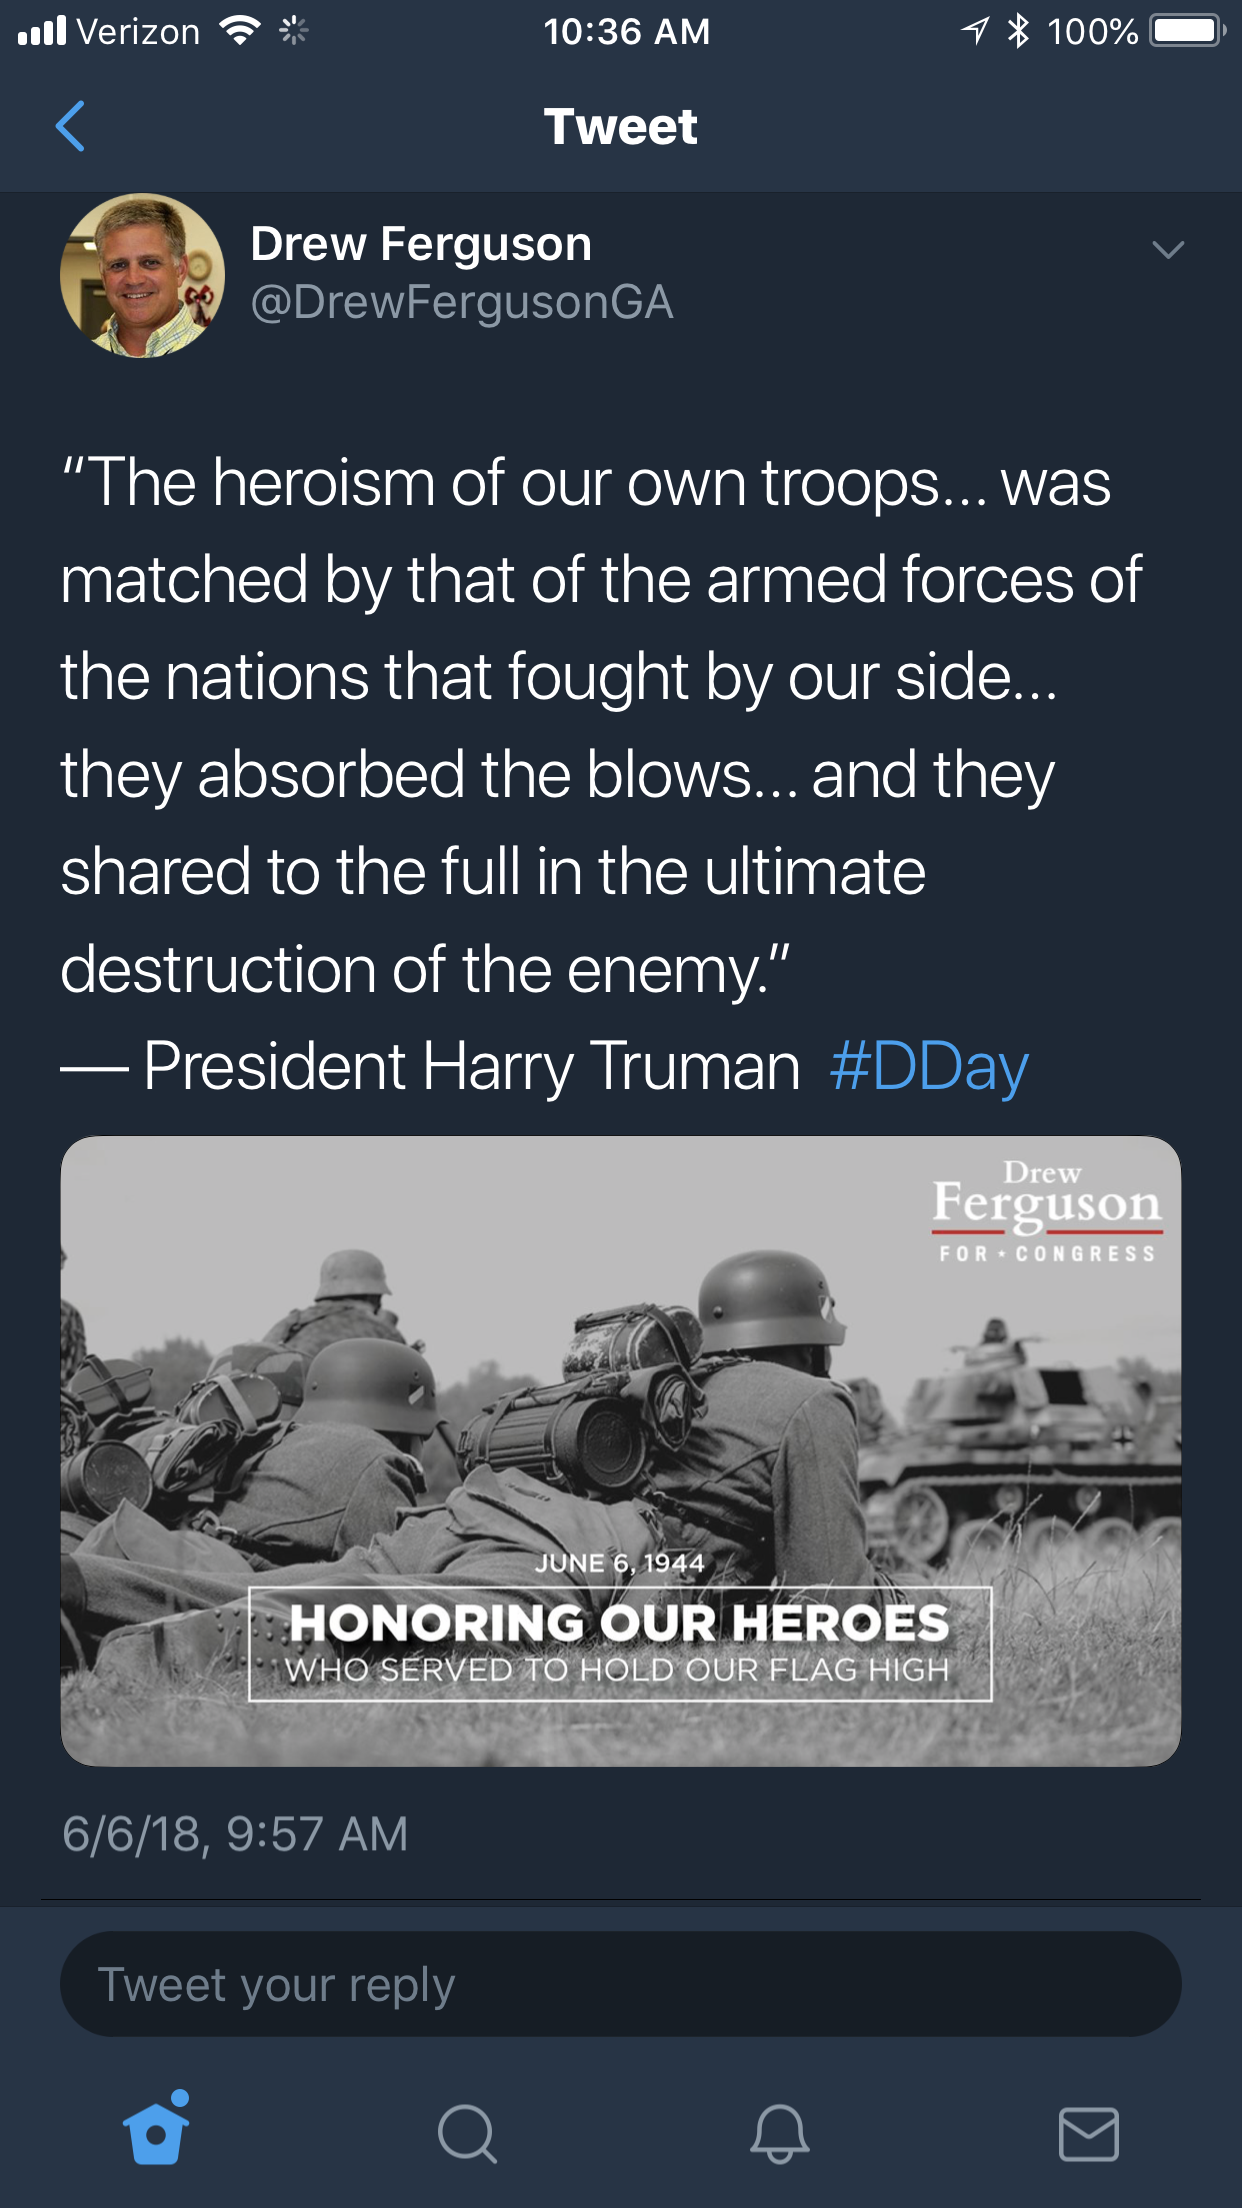 Rep. Drew Ferguson's campaign Twitter page posted this tribute to D-Day with an image of German soldiers (Twitter / @DrewFergusonGA)